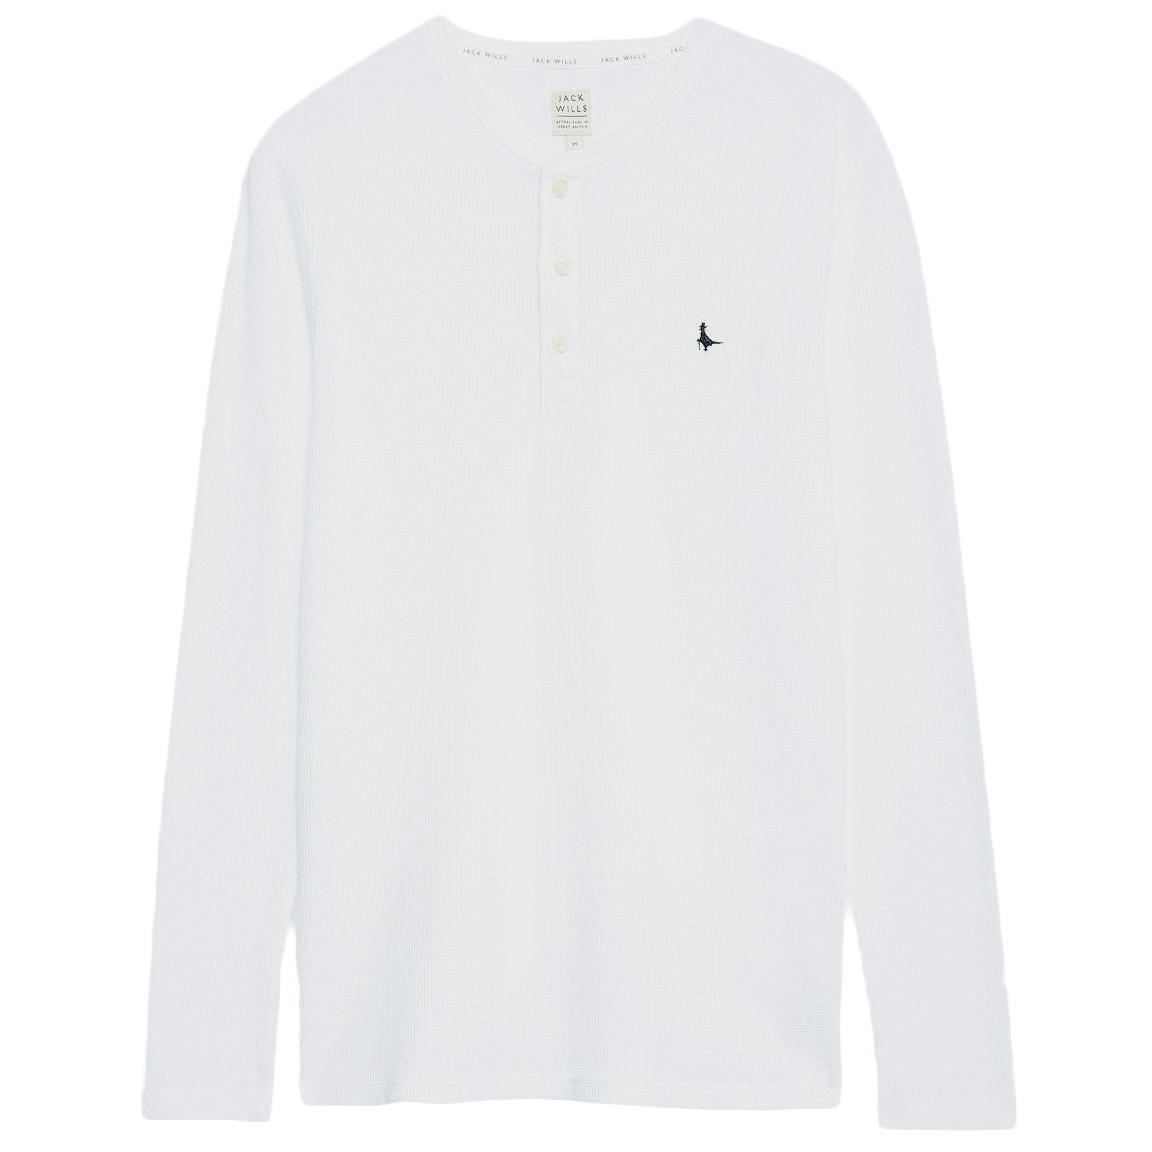 Jack Wills Men's Byworth Waffle Henley Top - White, L